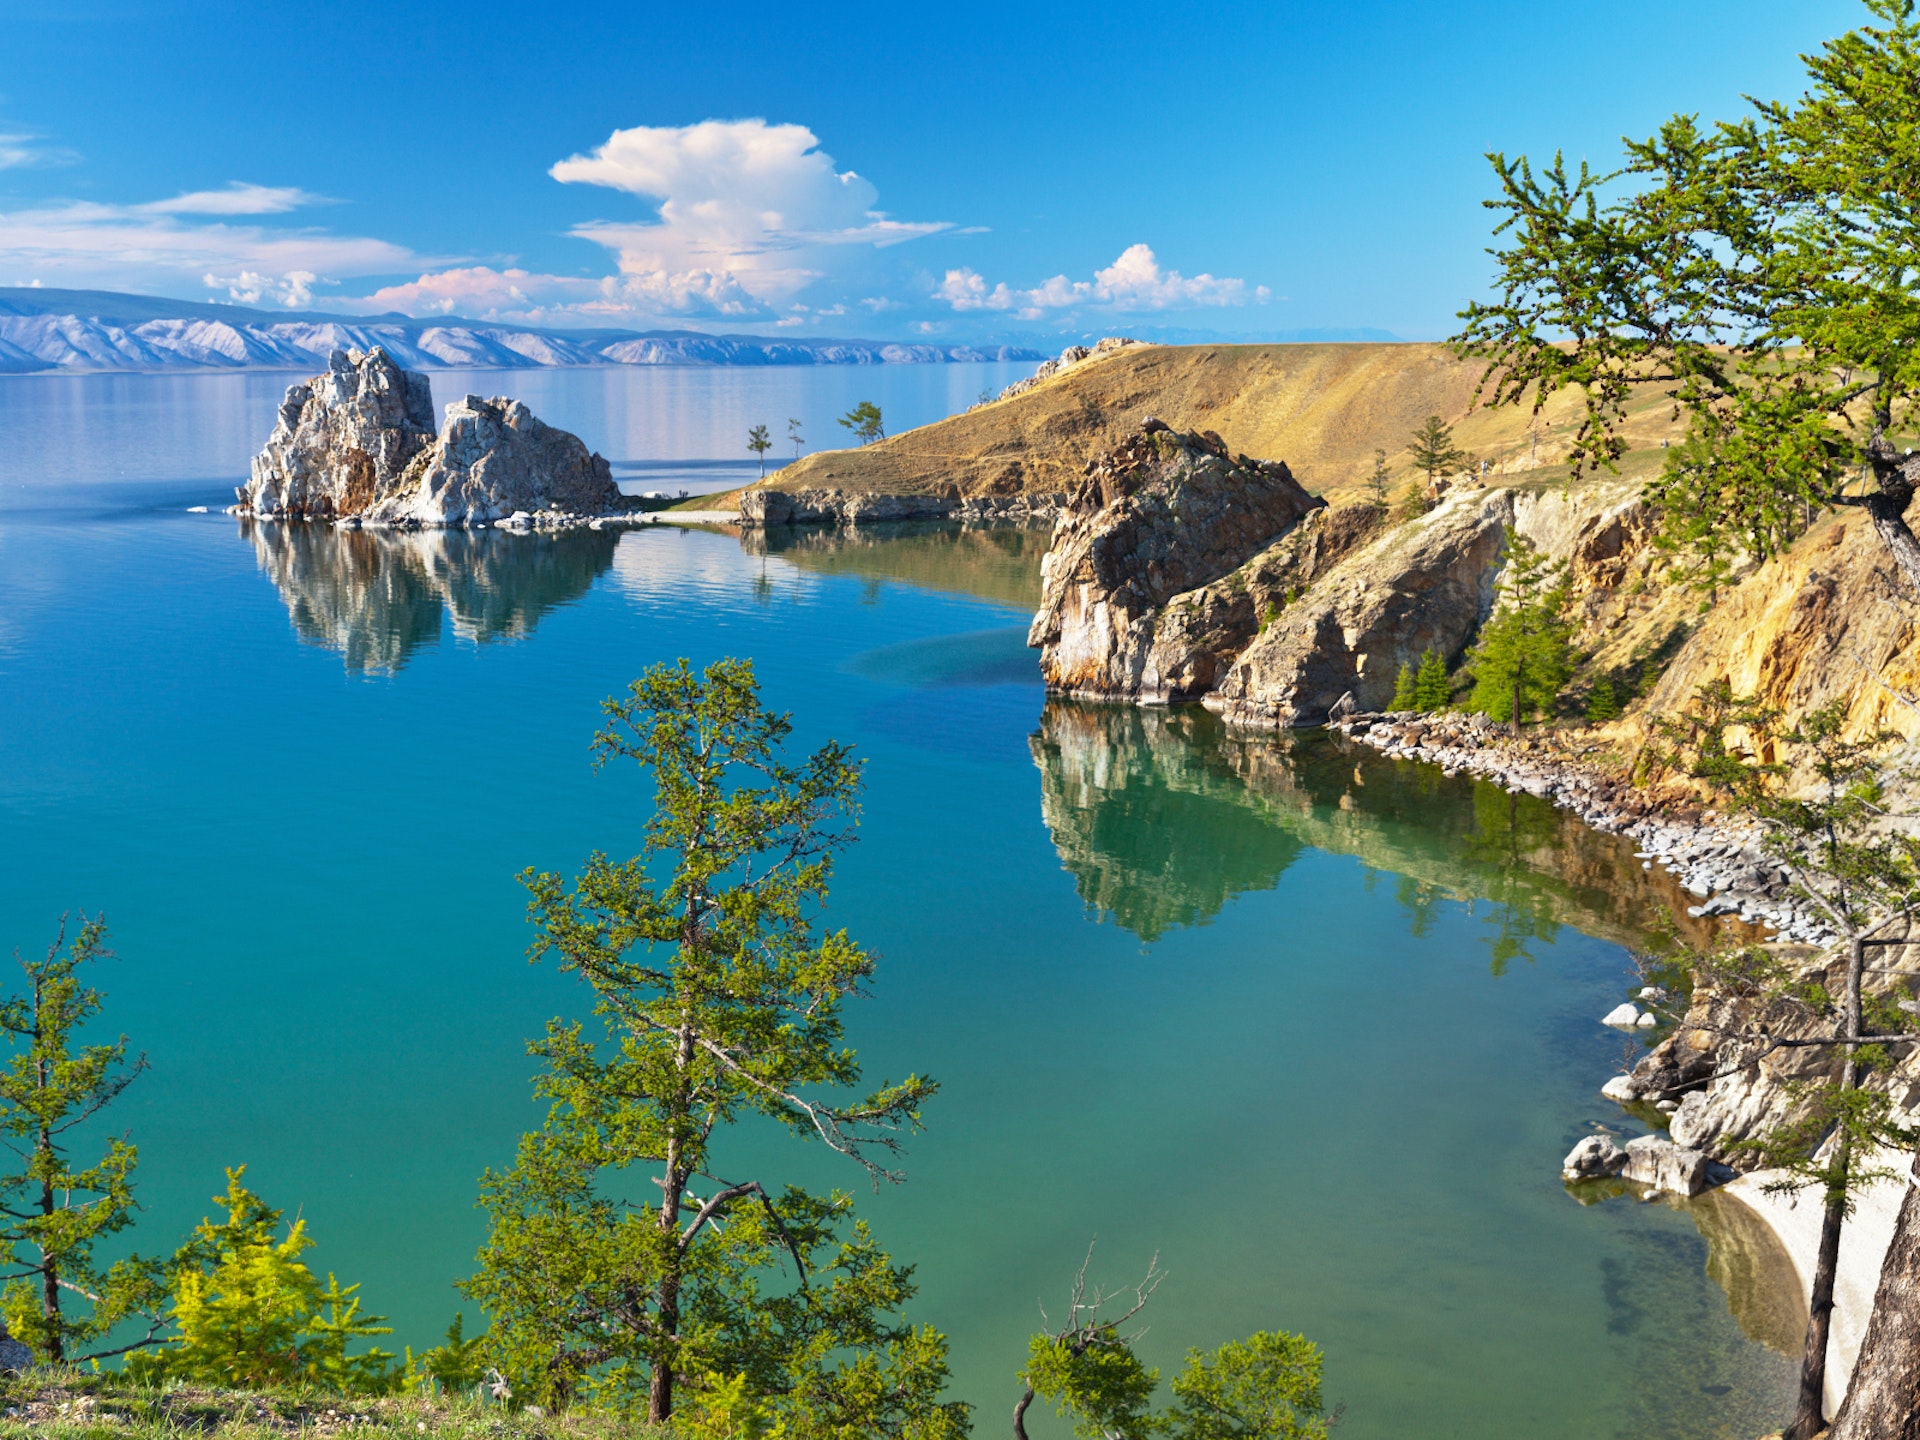 Seeing 1,600 tons of gold sunk, Lake Baikal holds many secrets. Join me in unraveling one of the most fascinating stories no one has ever revealed to you - News